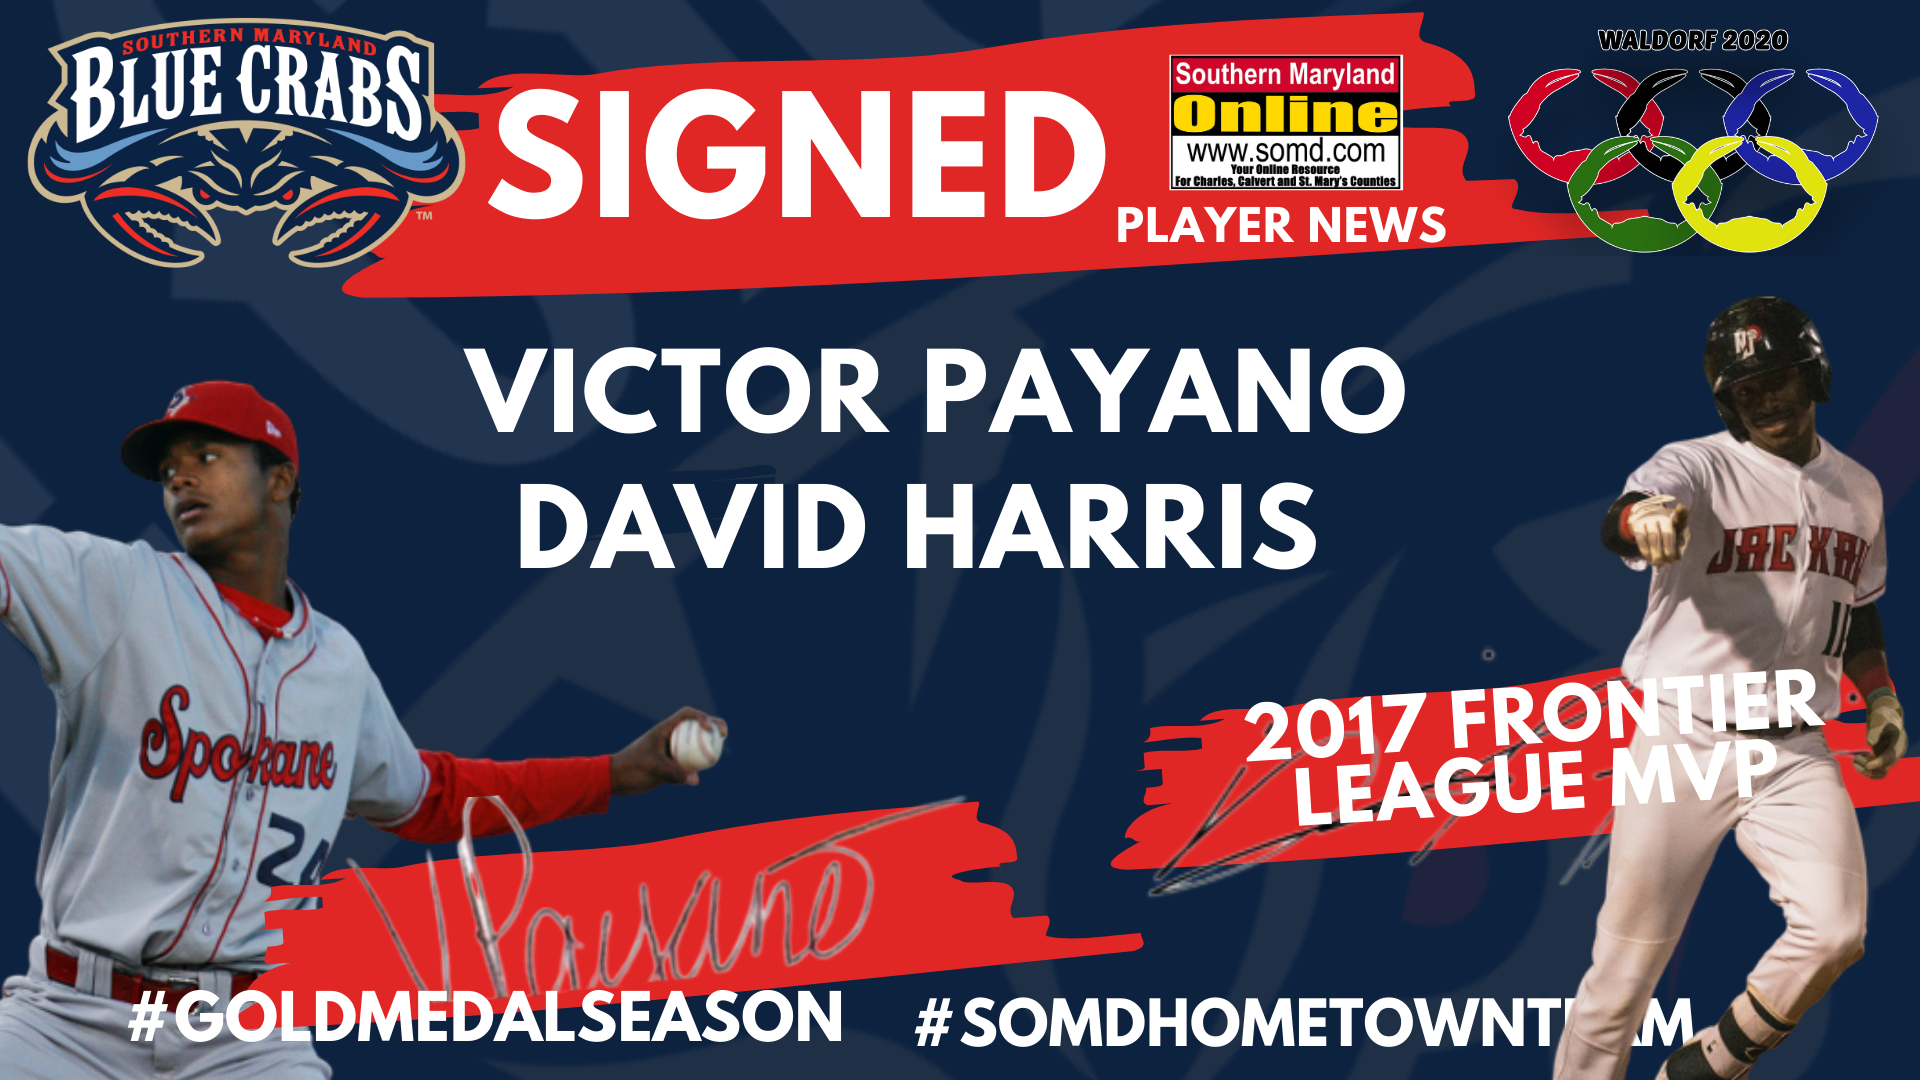 2017 Frontier League MVP, David Harris, and Victor Payano Sign With Blue Crabs